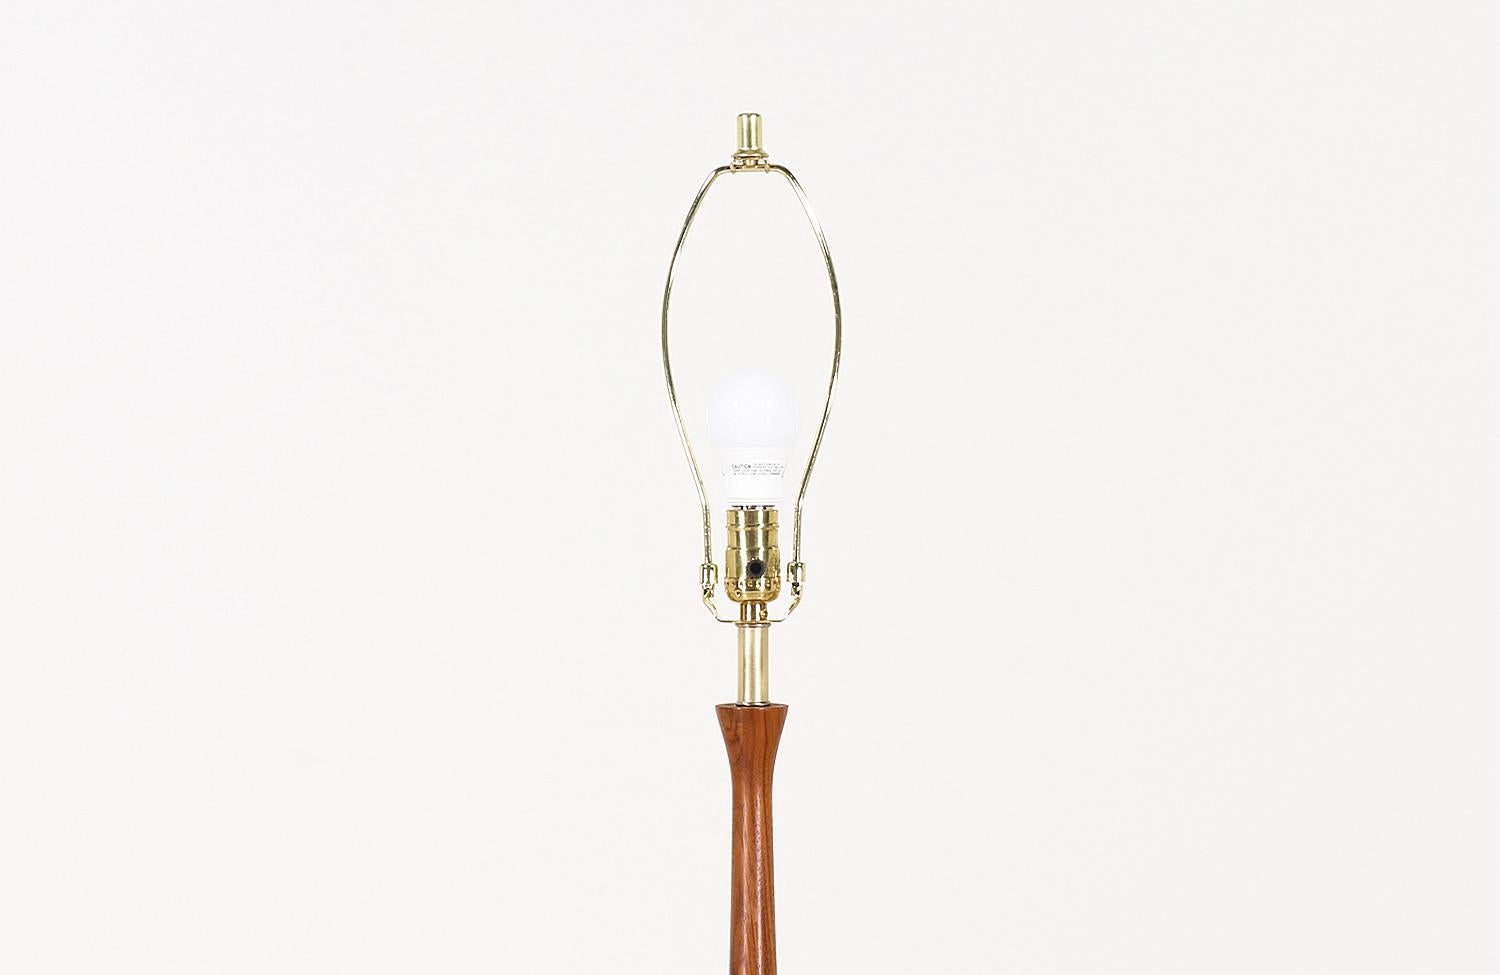 Brass Mid-Century Modern Walnut Floor Lamp with Side Table by Laurel